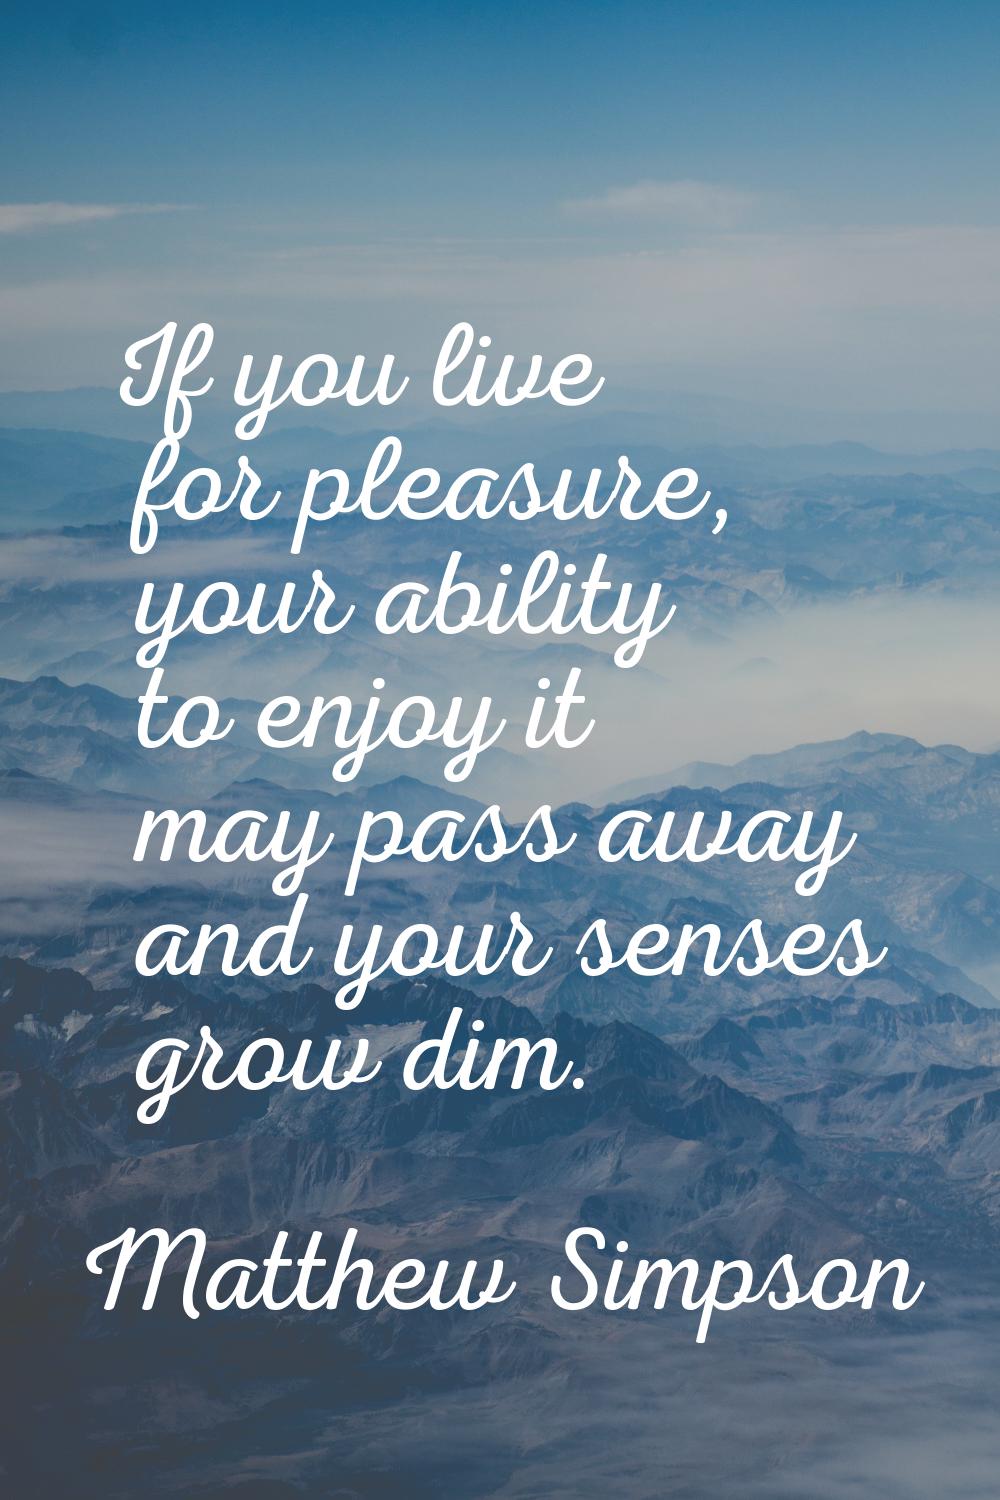 If you live for pleasure, your ability to enjoy it may pass away and your senses grow dim.